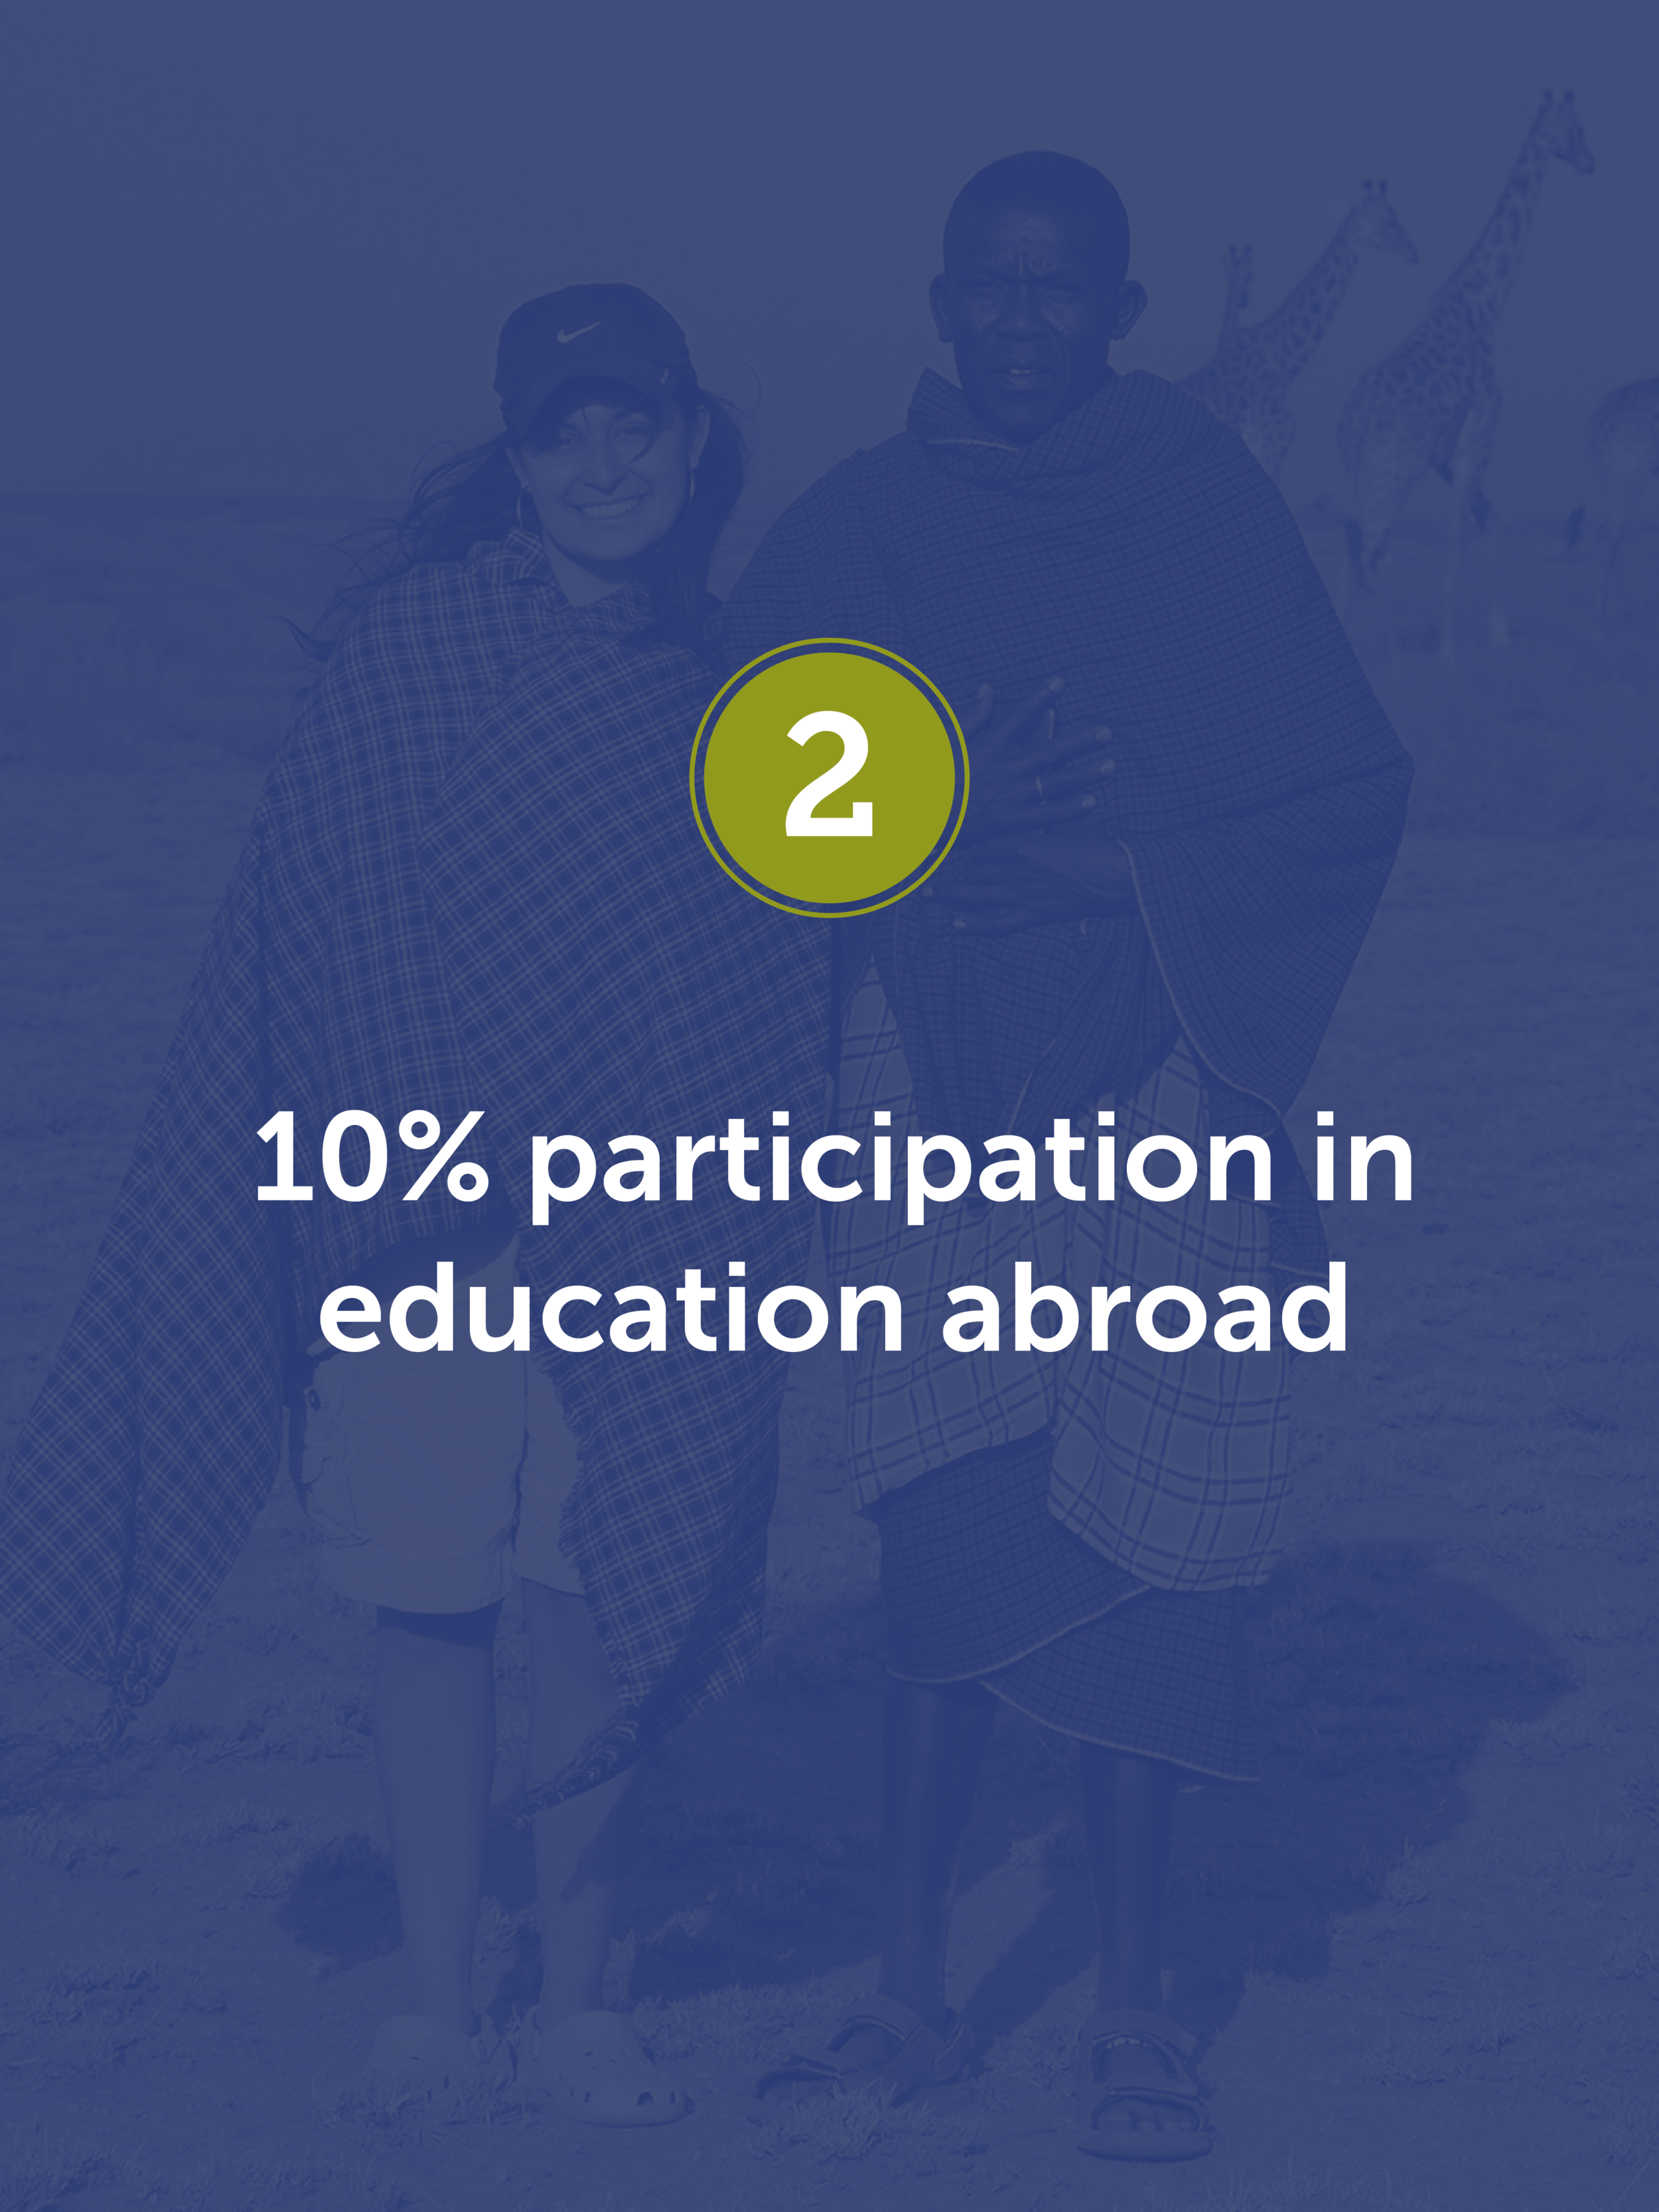 Only 10% of U.S. college graduates have participated in education abroad.